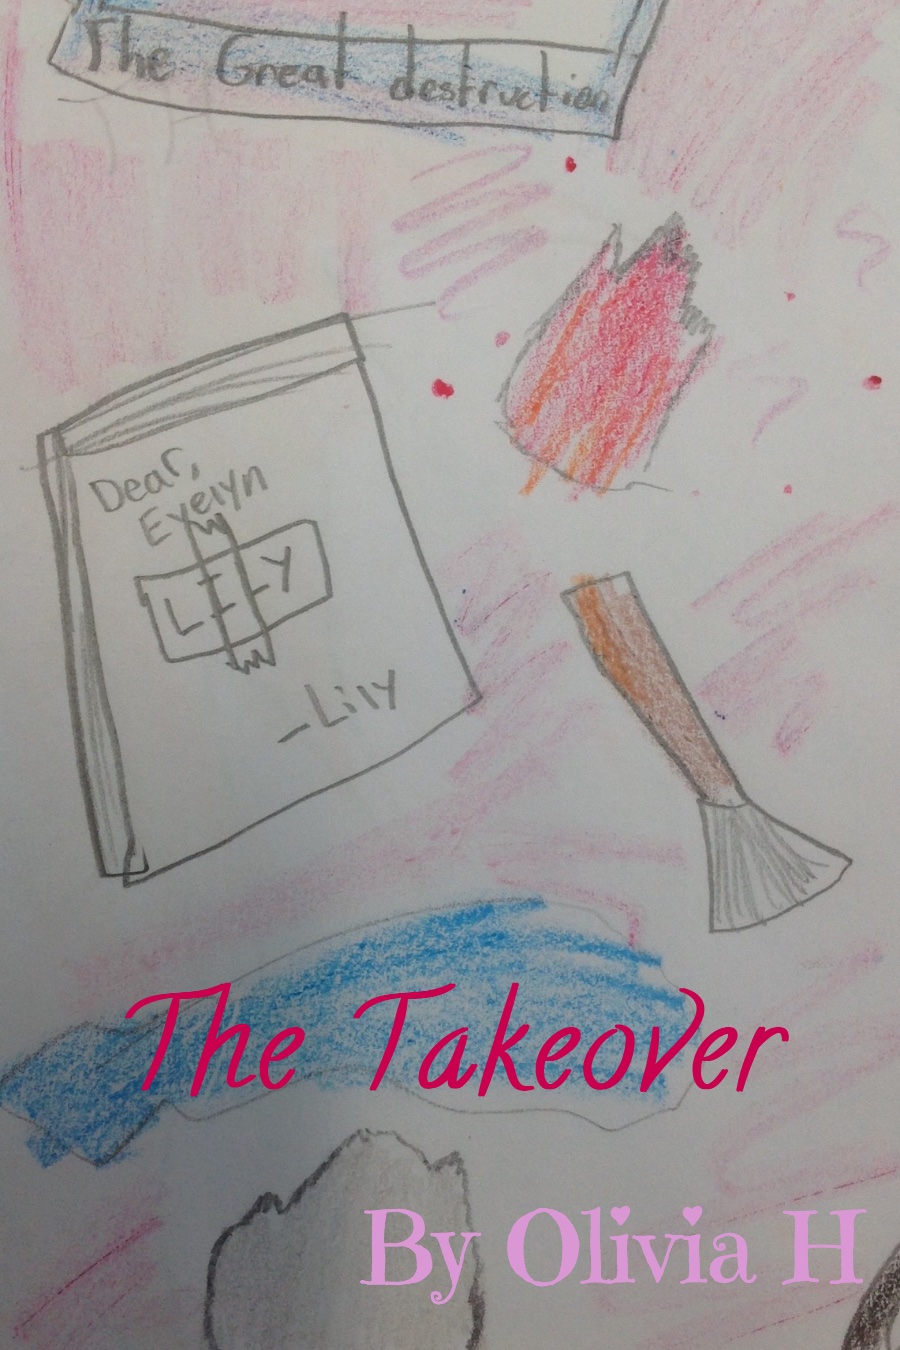 The Takeover by Olivia Livy H